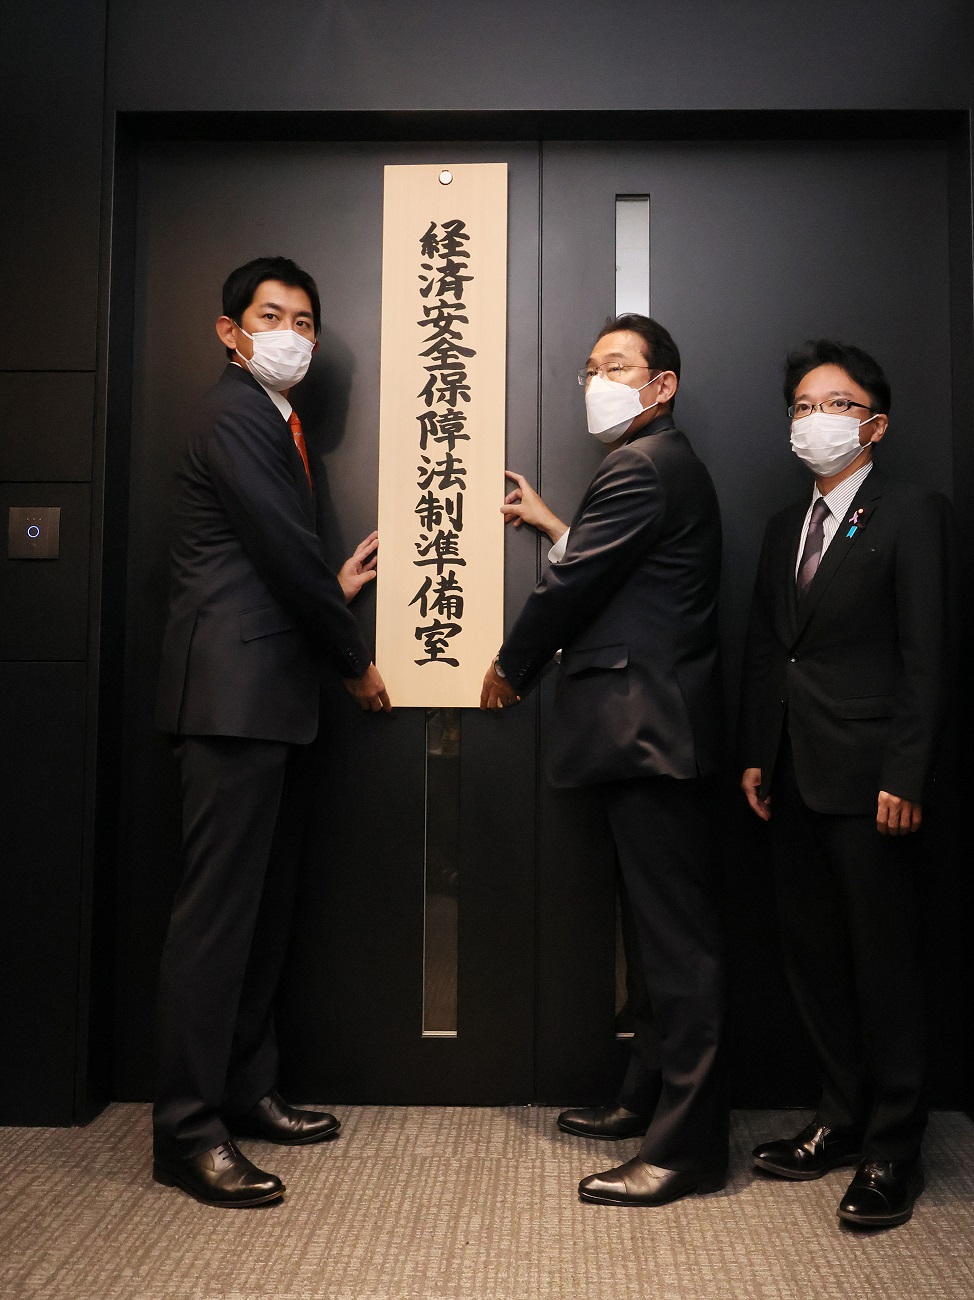 Photograph of the Prime Minister installing a signboard (2)